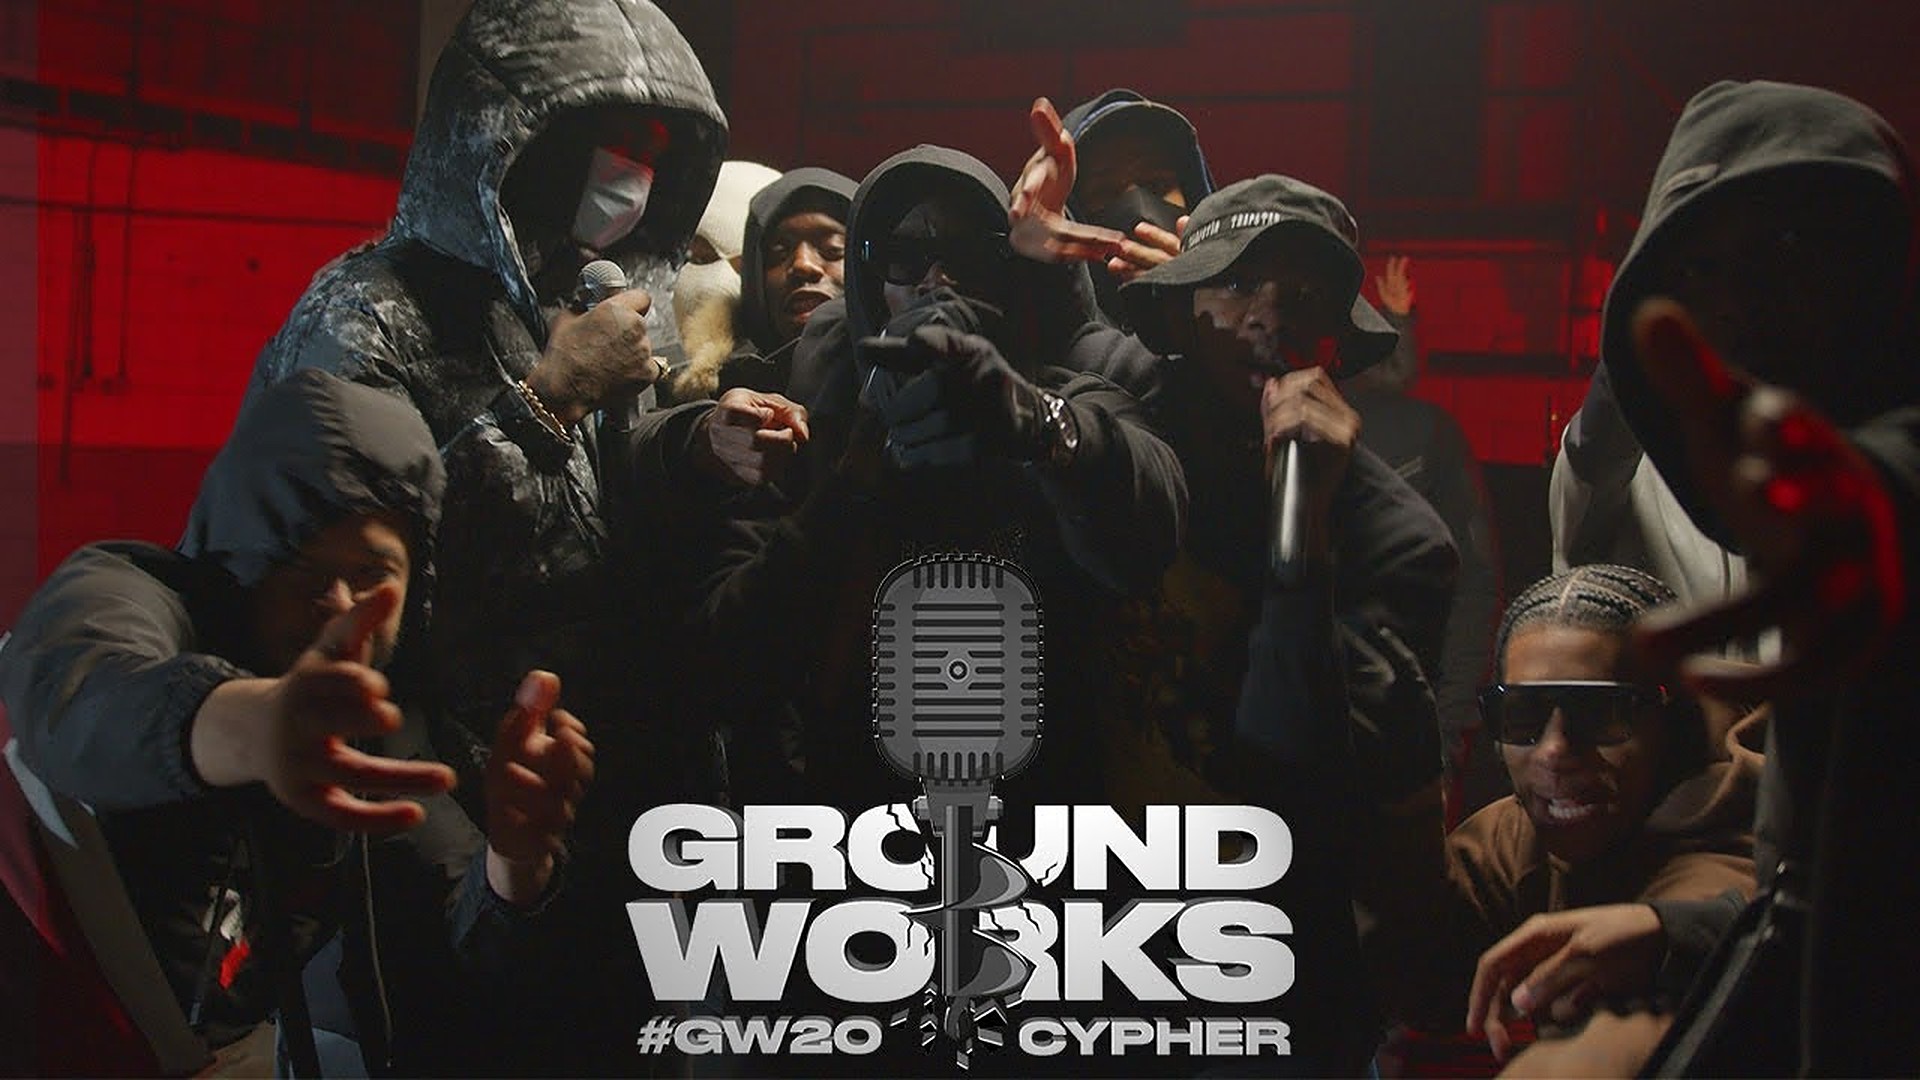 Drill Takes Centre Stage With Groundworks 2020 Cypher [@GWonline_]